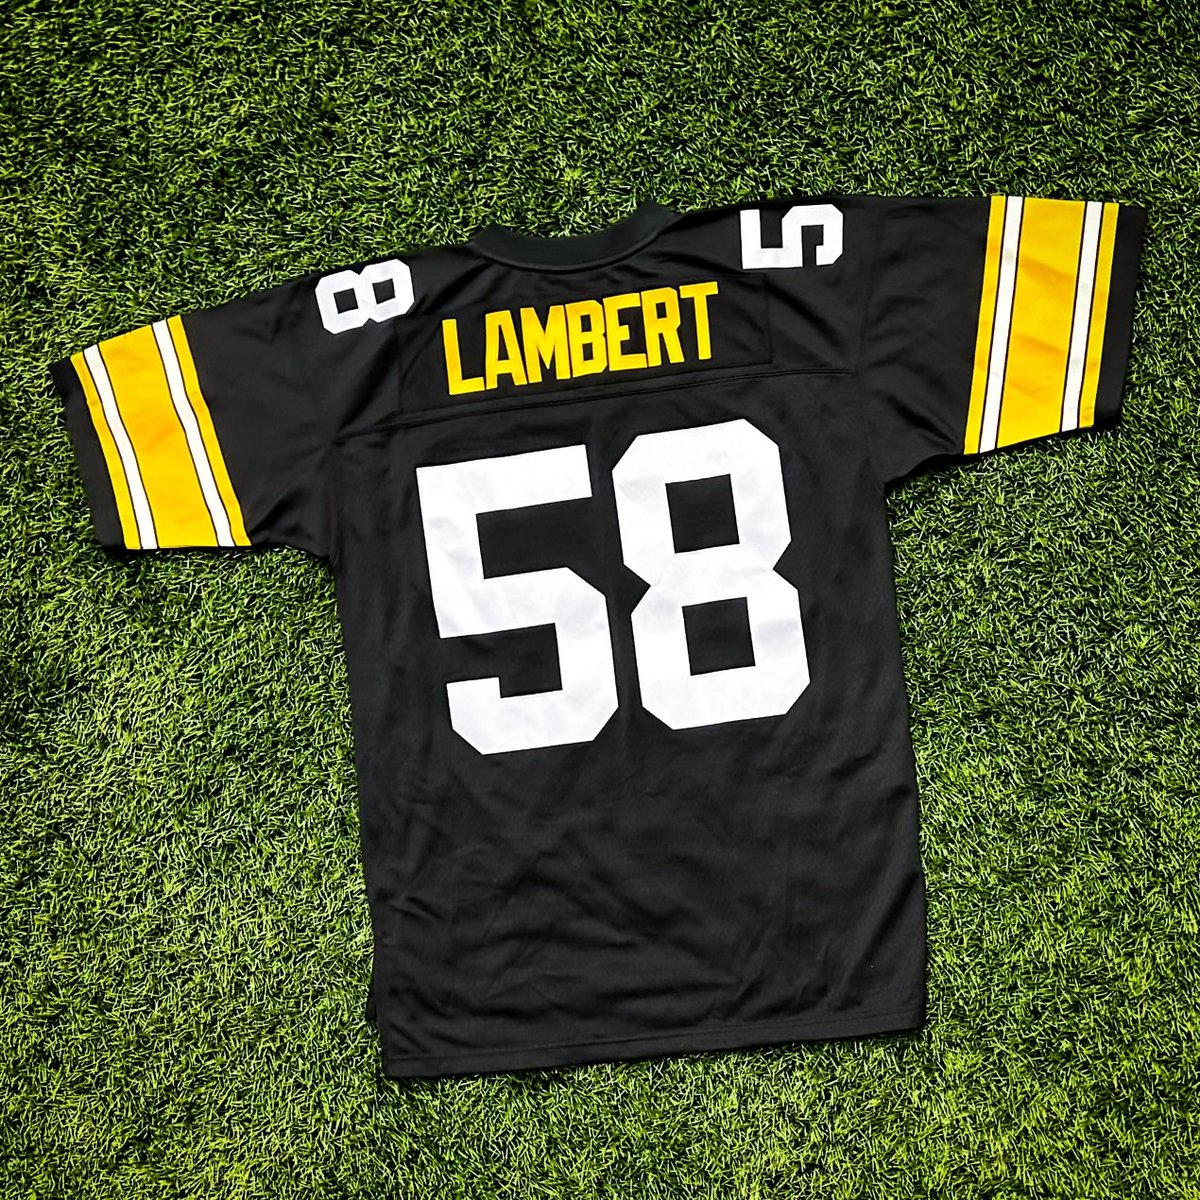 Who wants a Jack Lambert block jersey⁉️ 🔁 for your chance to win!